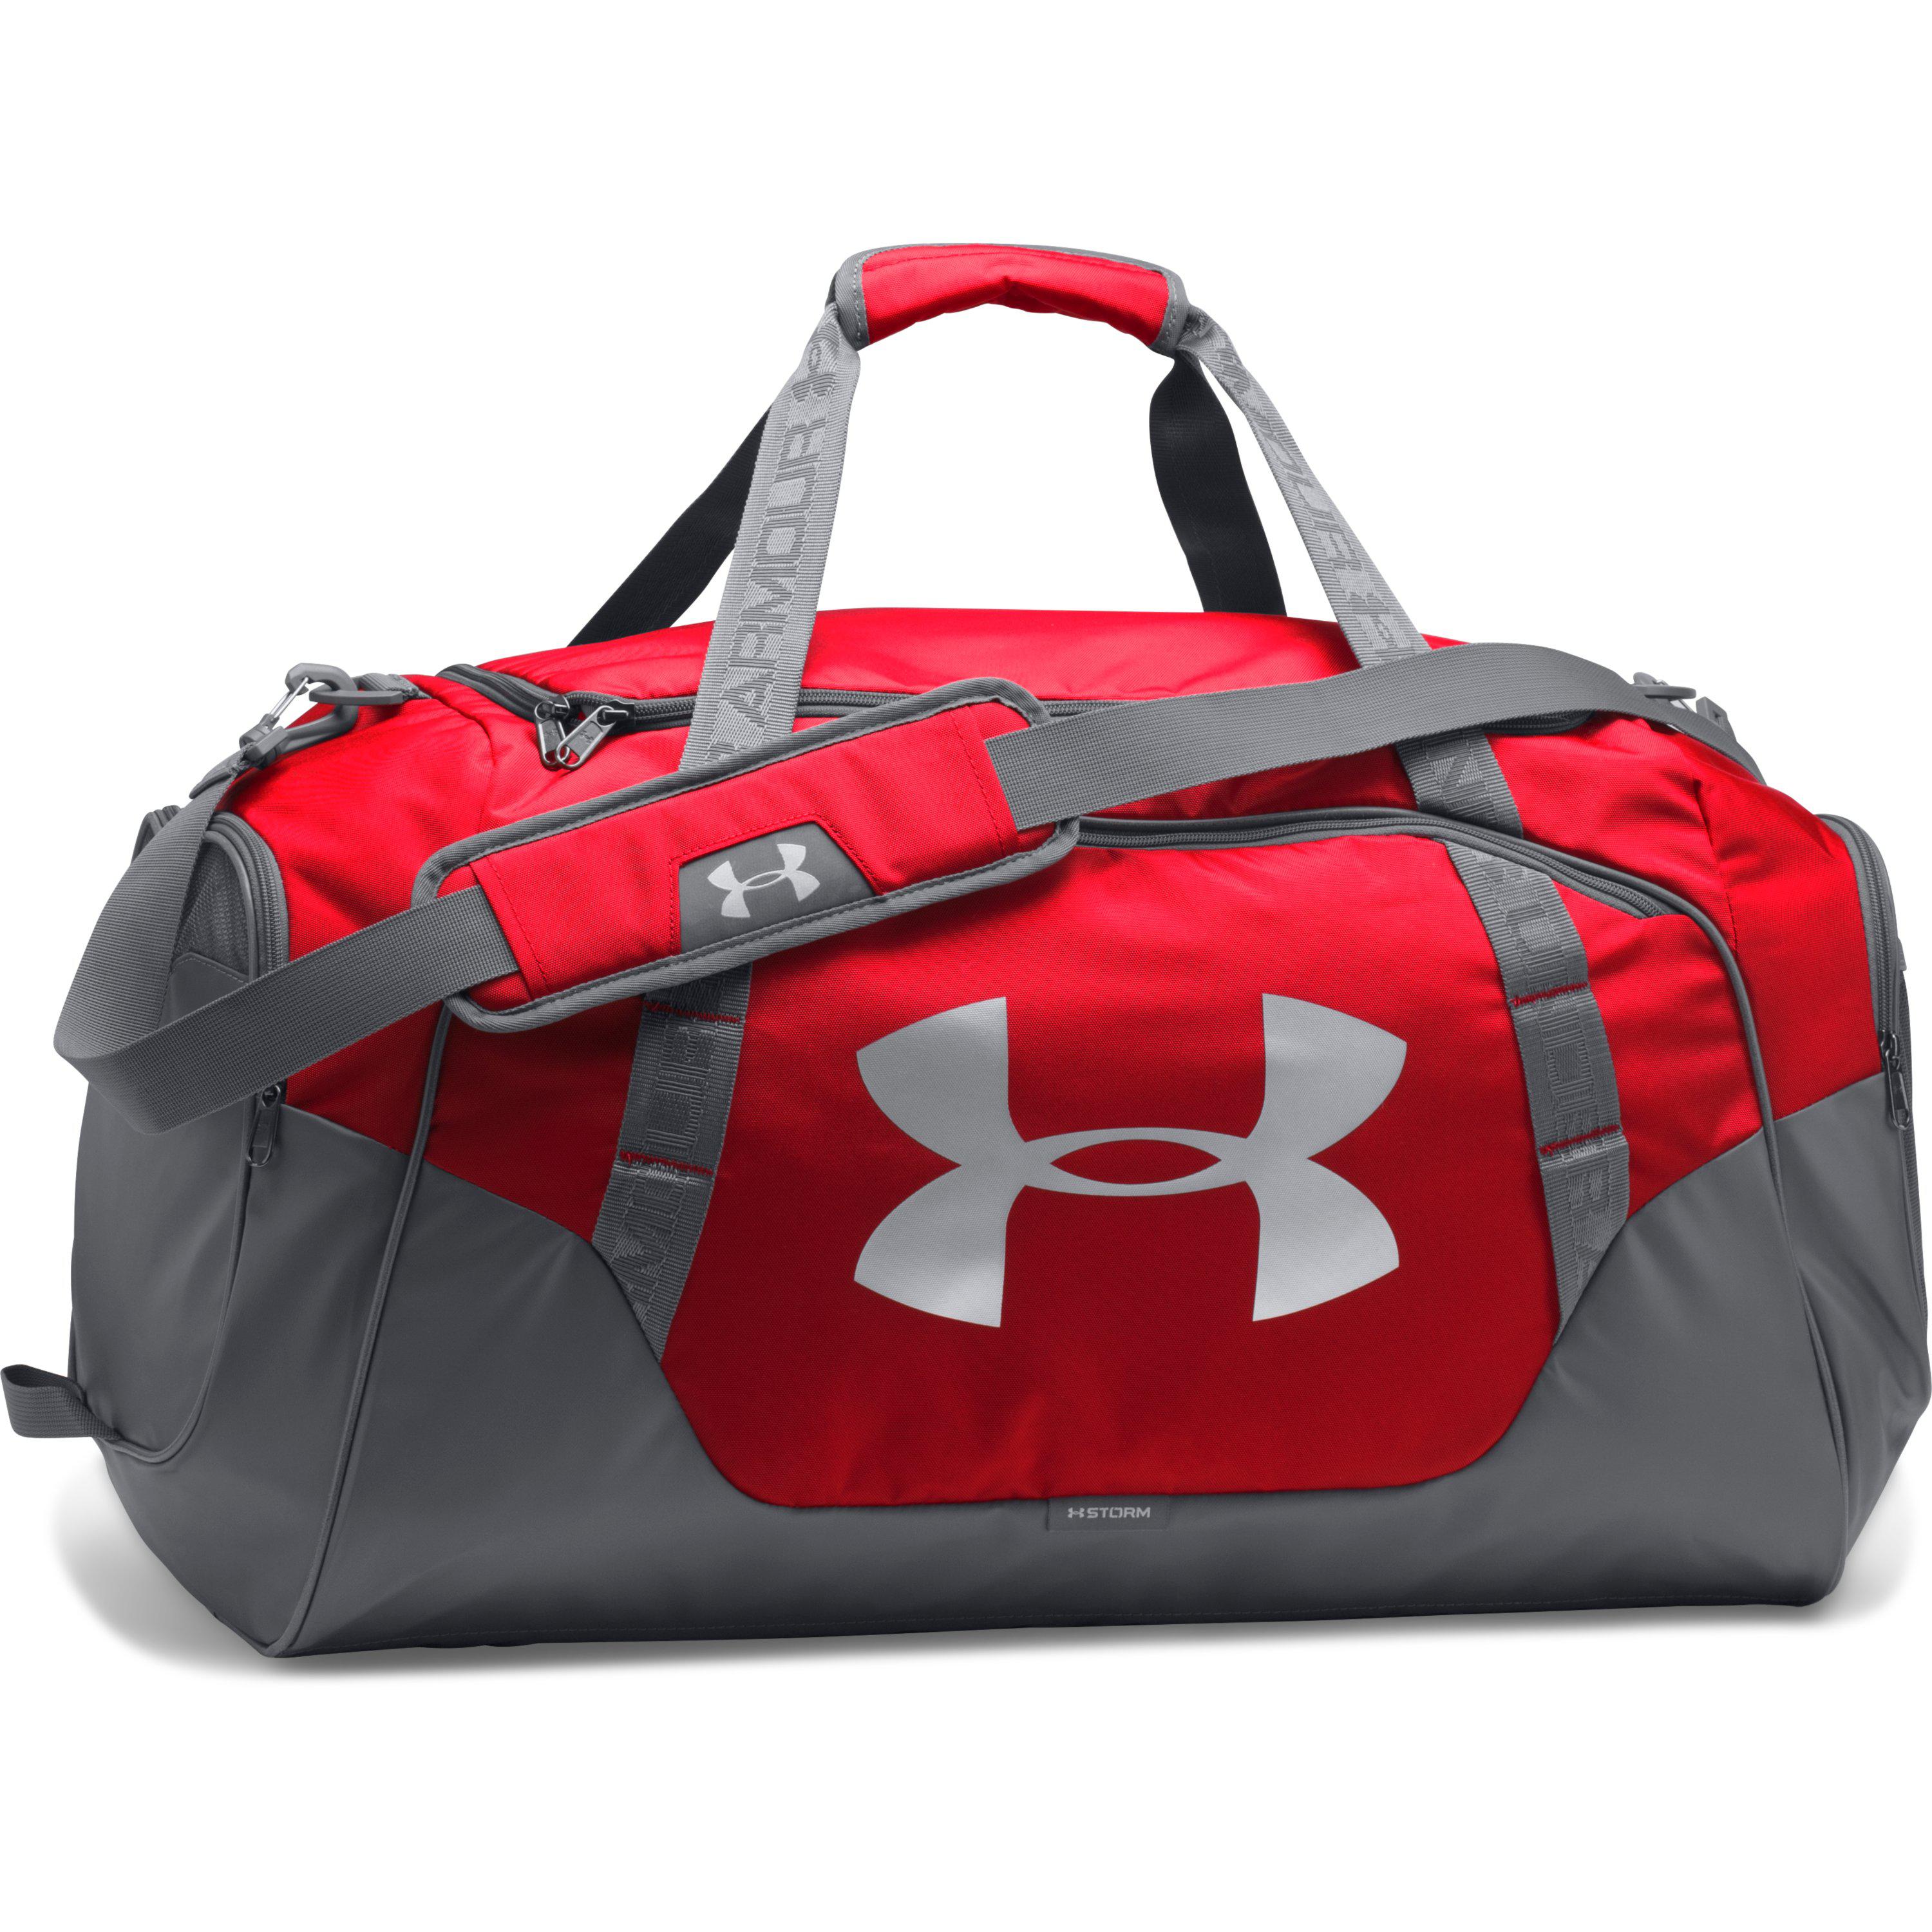 Under Armour Men's Ua Undeniable 3.0 Large Duffle Bag in Red/Graphite (Red)  for Men - Lyst